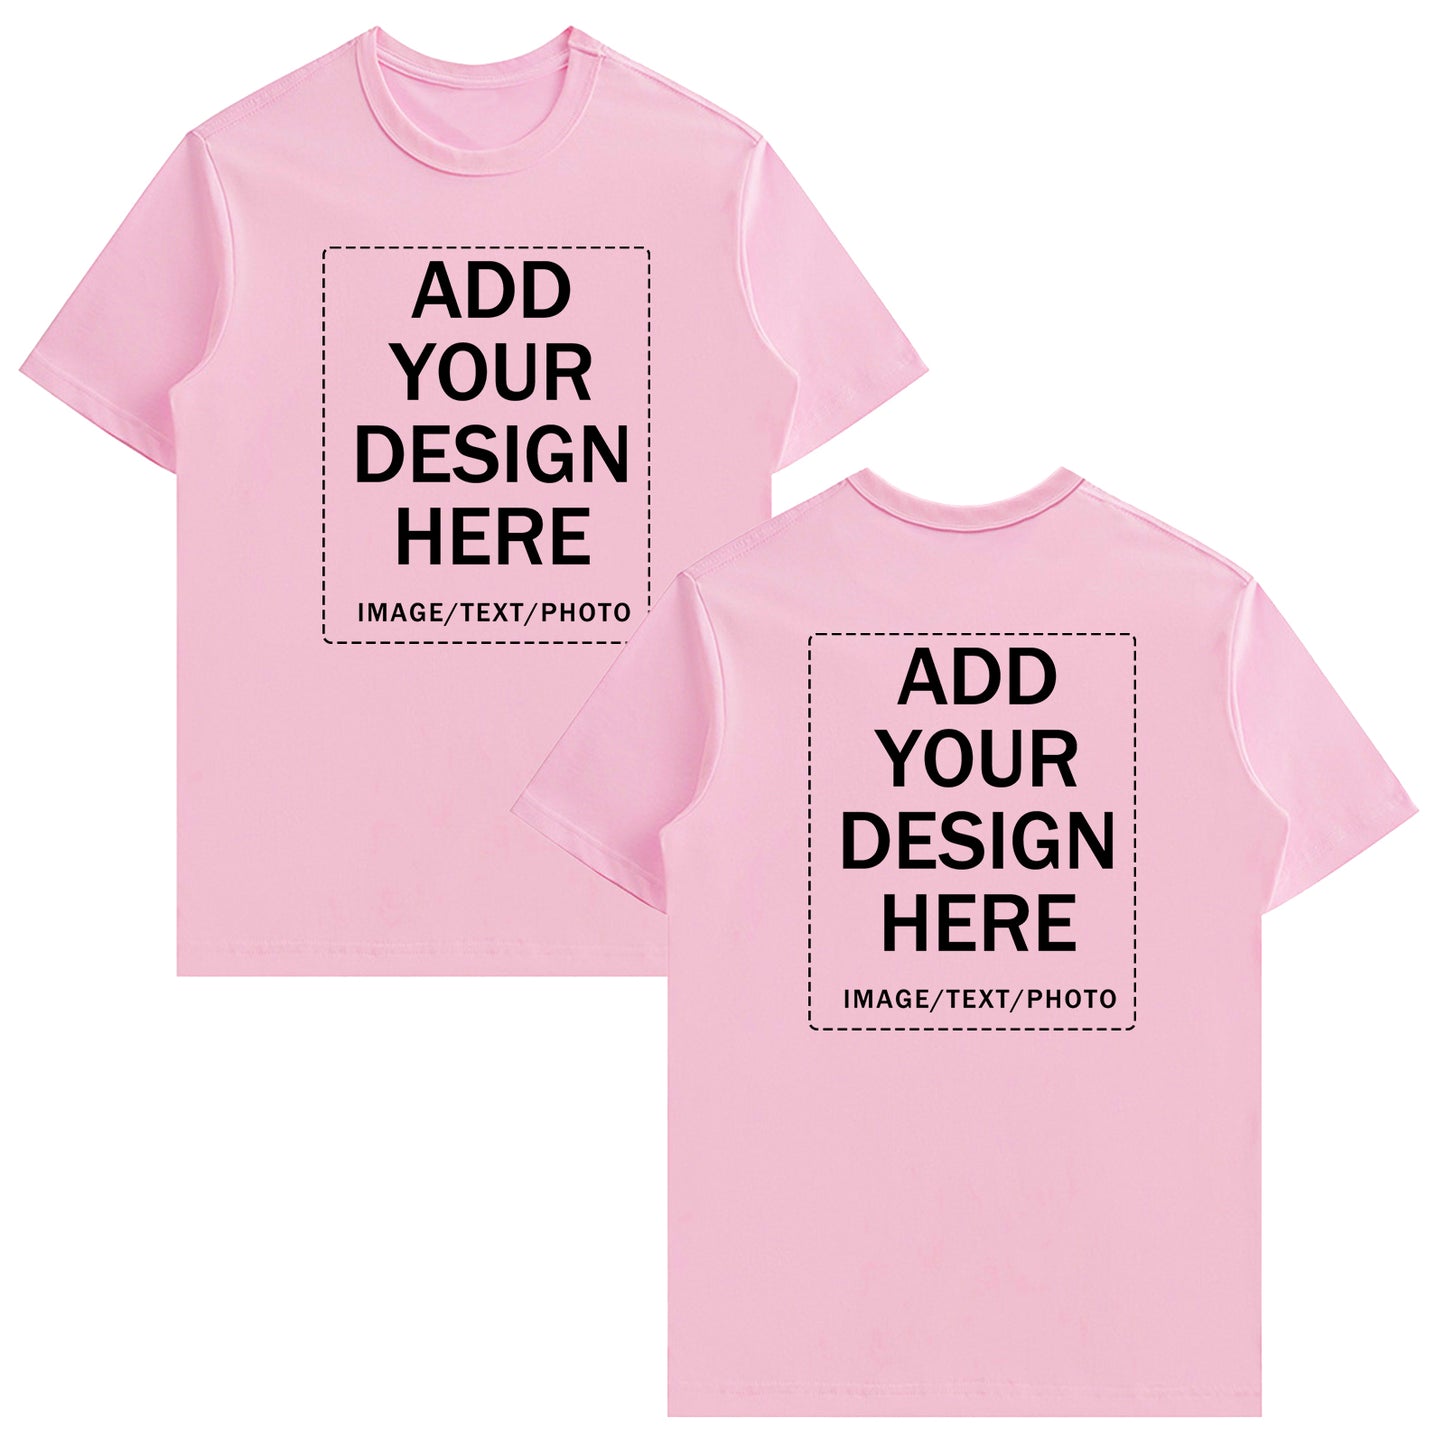 Custom T Shirt for Men Women Design Own Shirt Image/Text Personalized Cotton Tee Front/Back Print